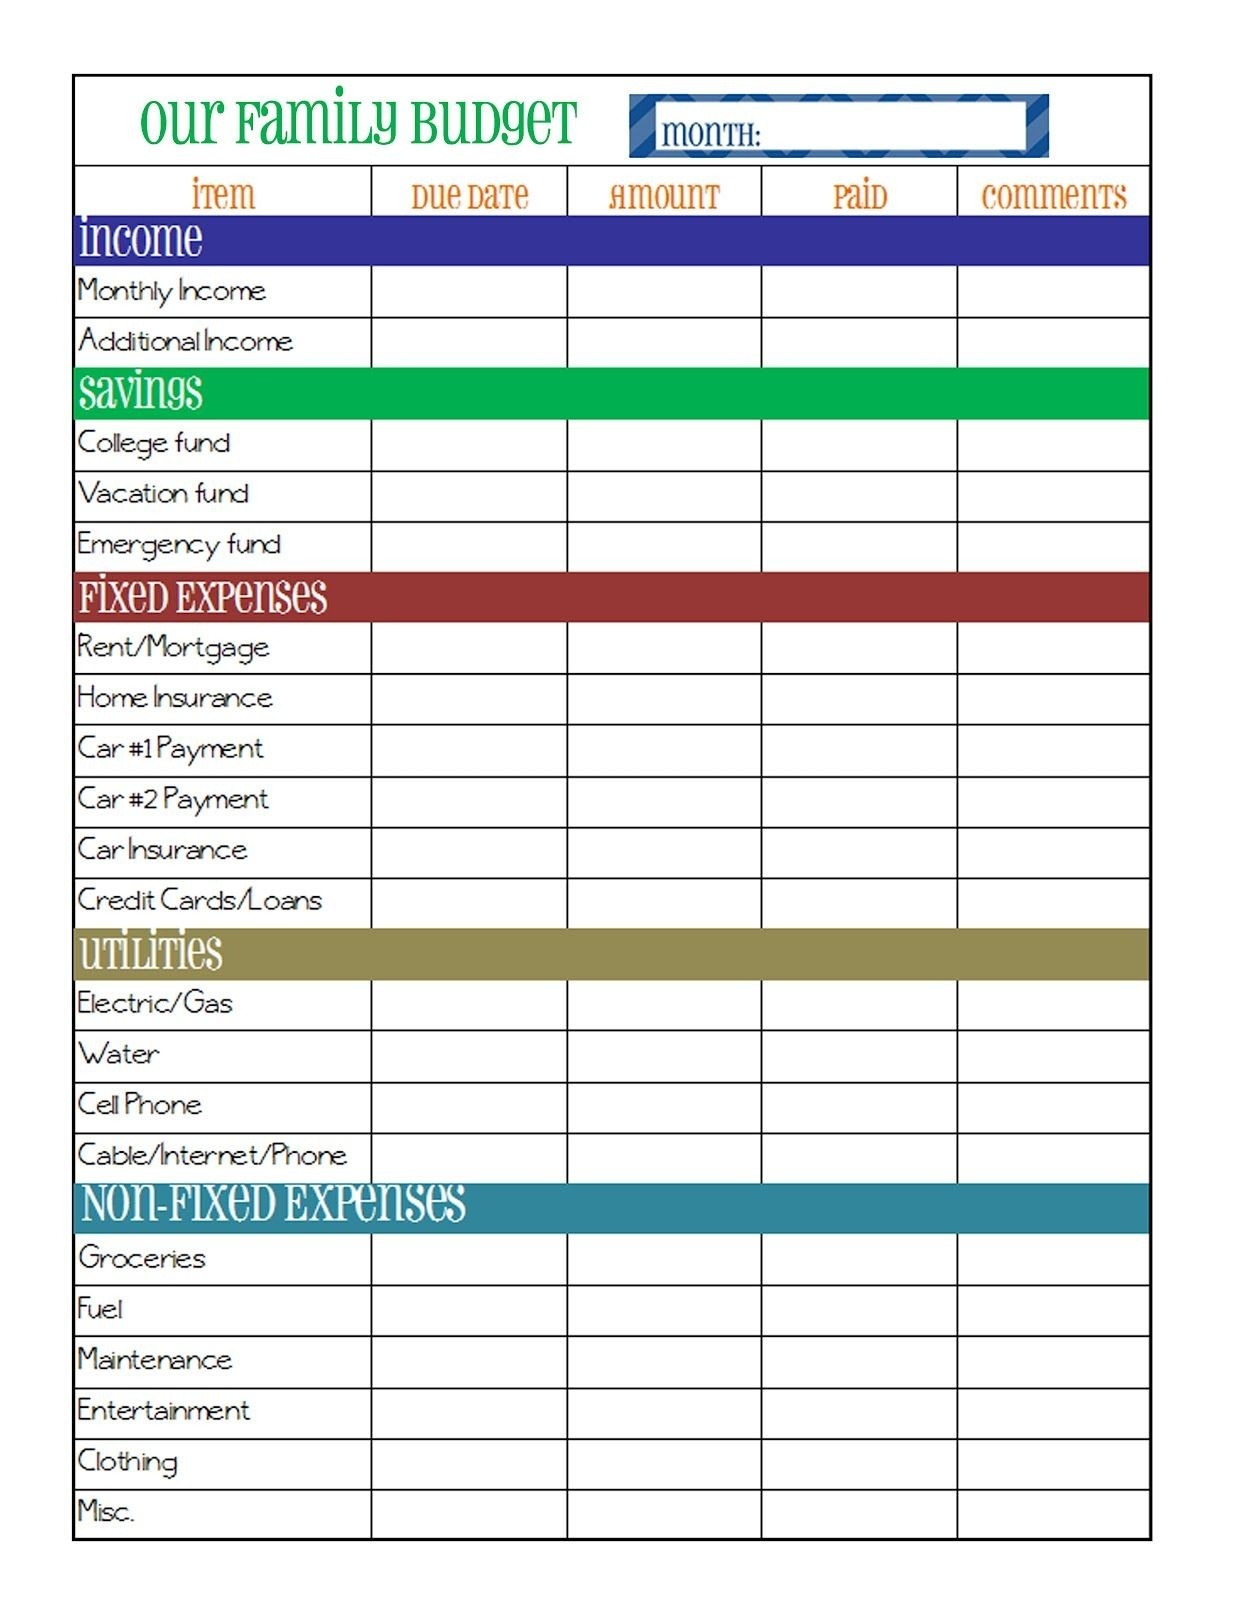 Budgeting Charts Free Printable Archives - Mavensocial.co Unique - Budgeting Charts Free Printable